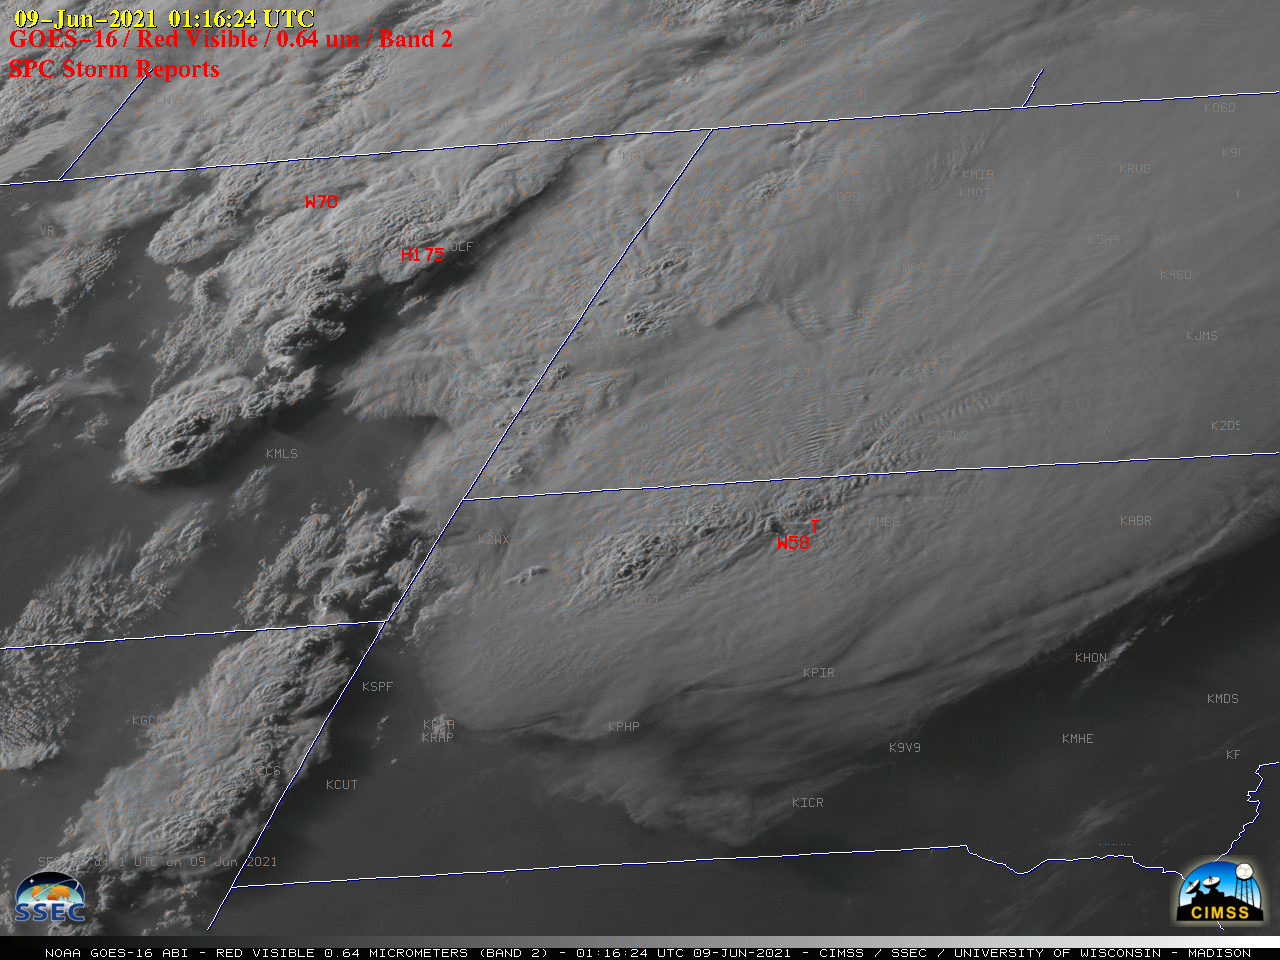 GOES-16 “Red” Visible (0.64 µm) images, with SPC Storm Reports plotted in red [click to play animation | MP4] 